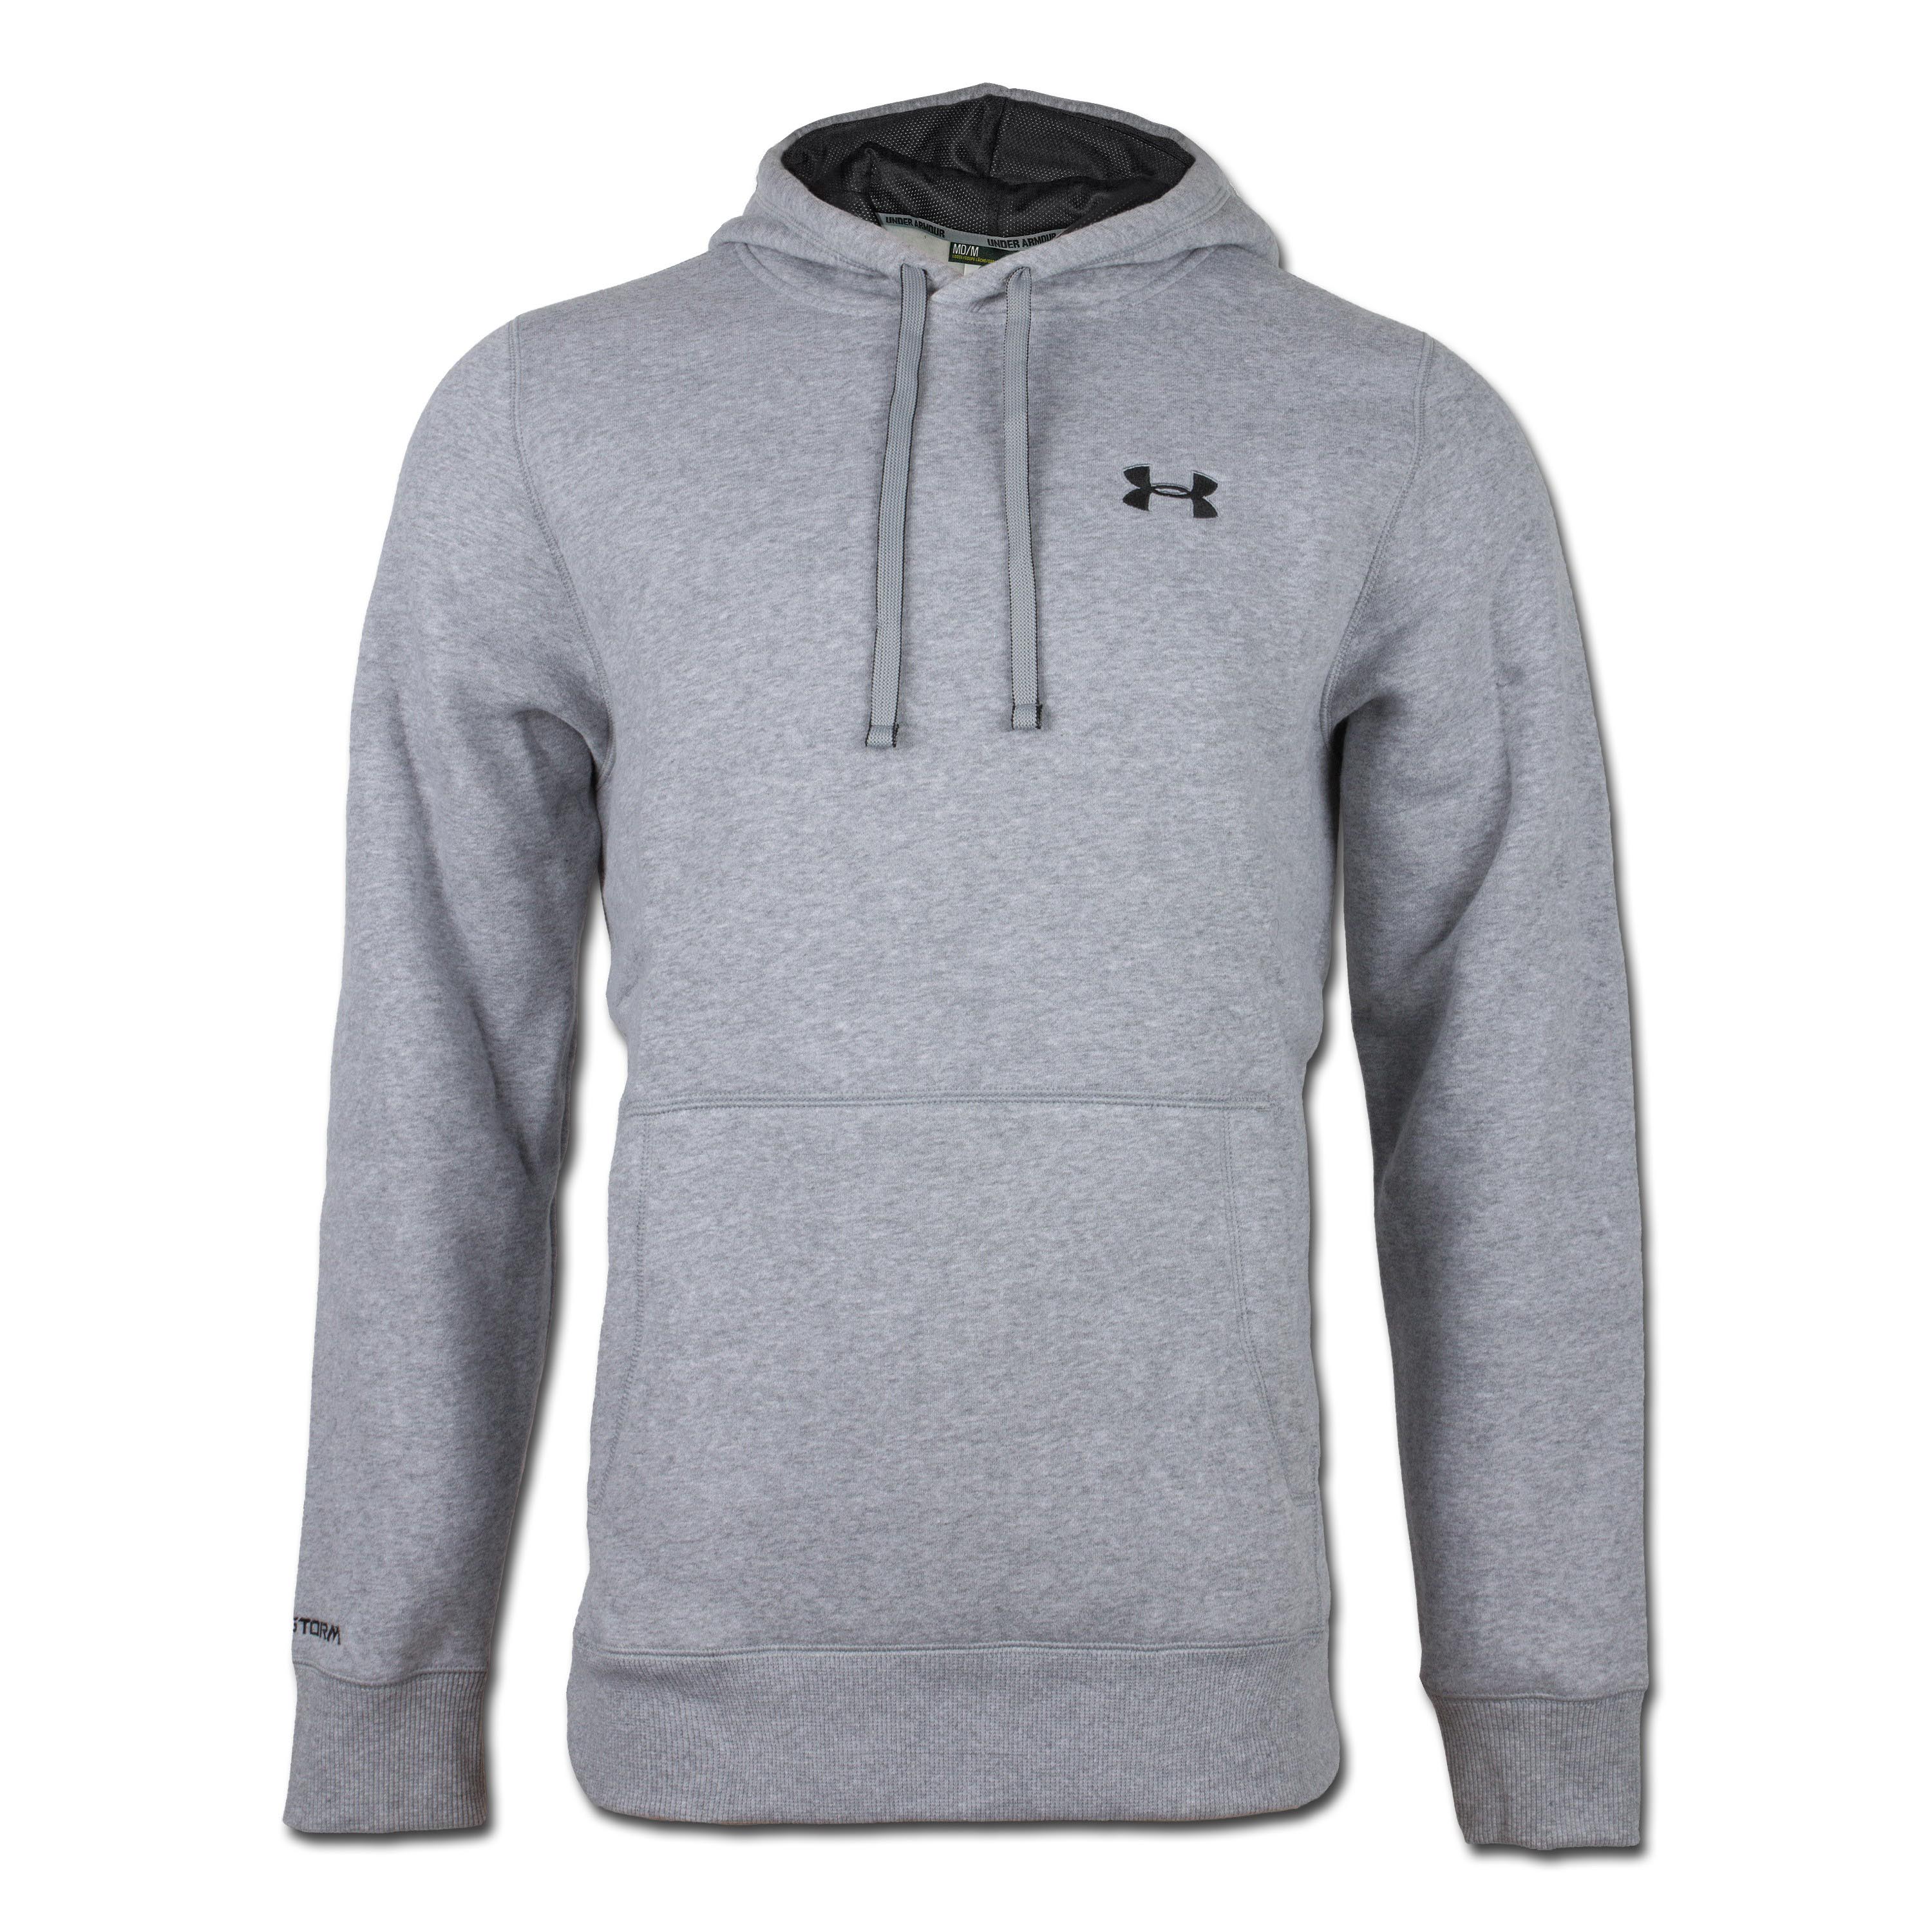 Under Armour Charged Cotton Rival Hoody gray | Under Armour Charged ...